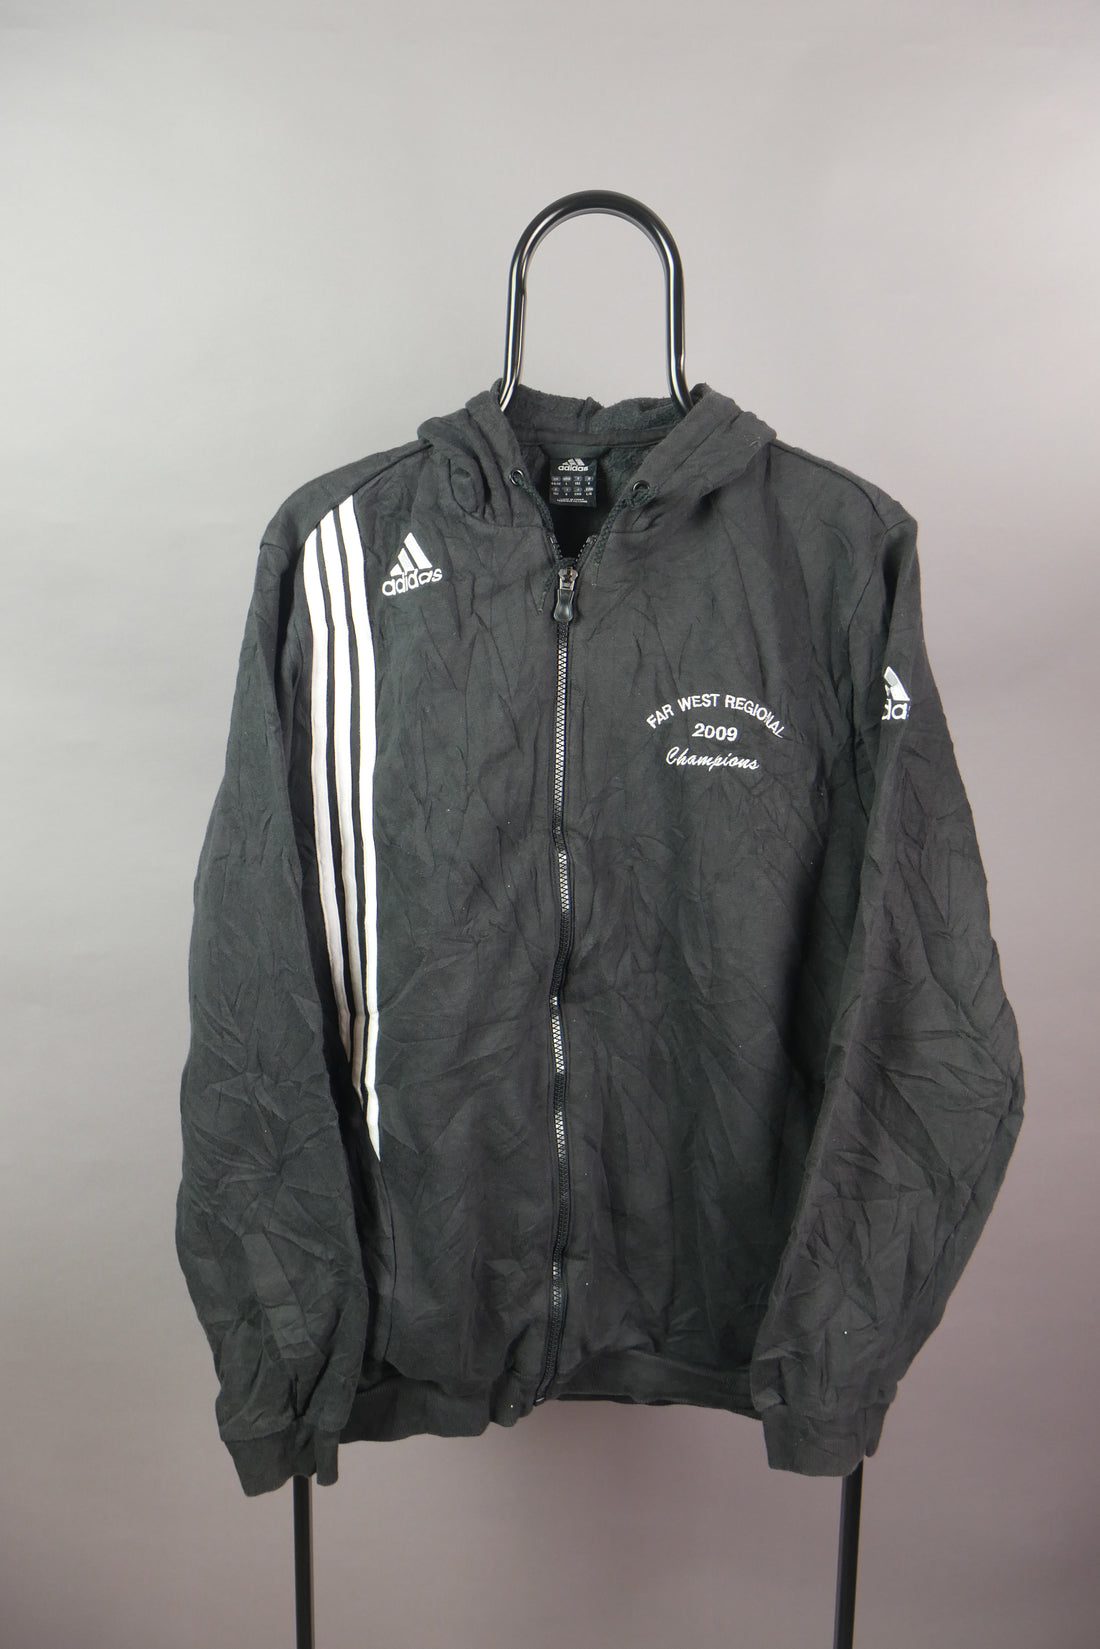 The Adidas Embroidered Zip Up Hoodie (L)